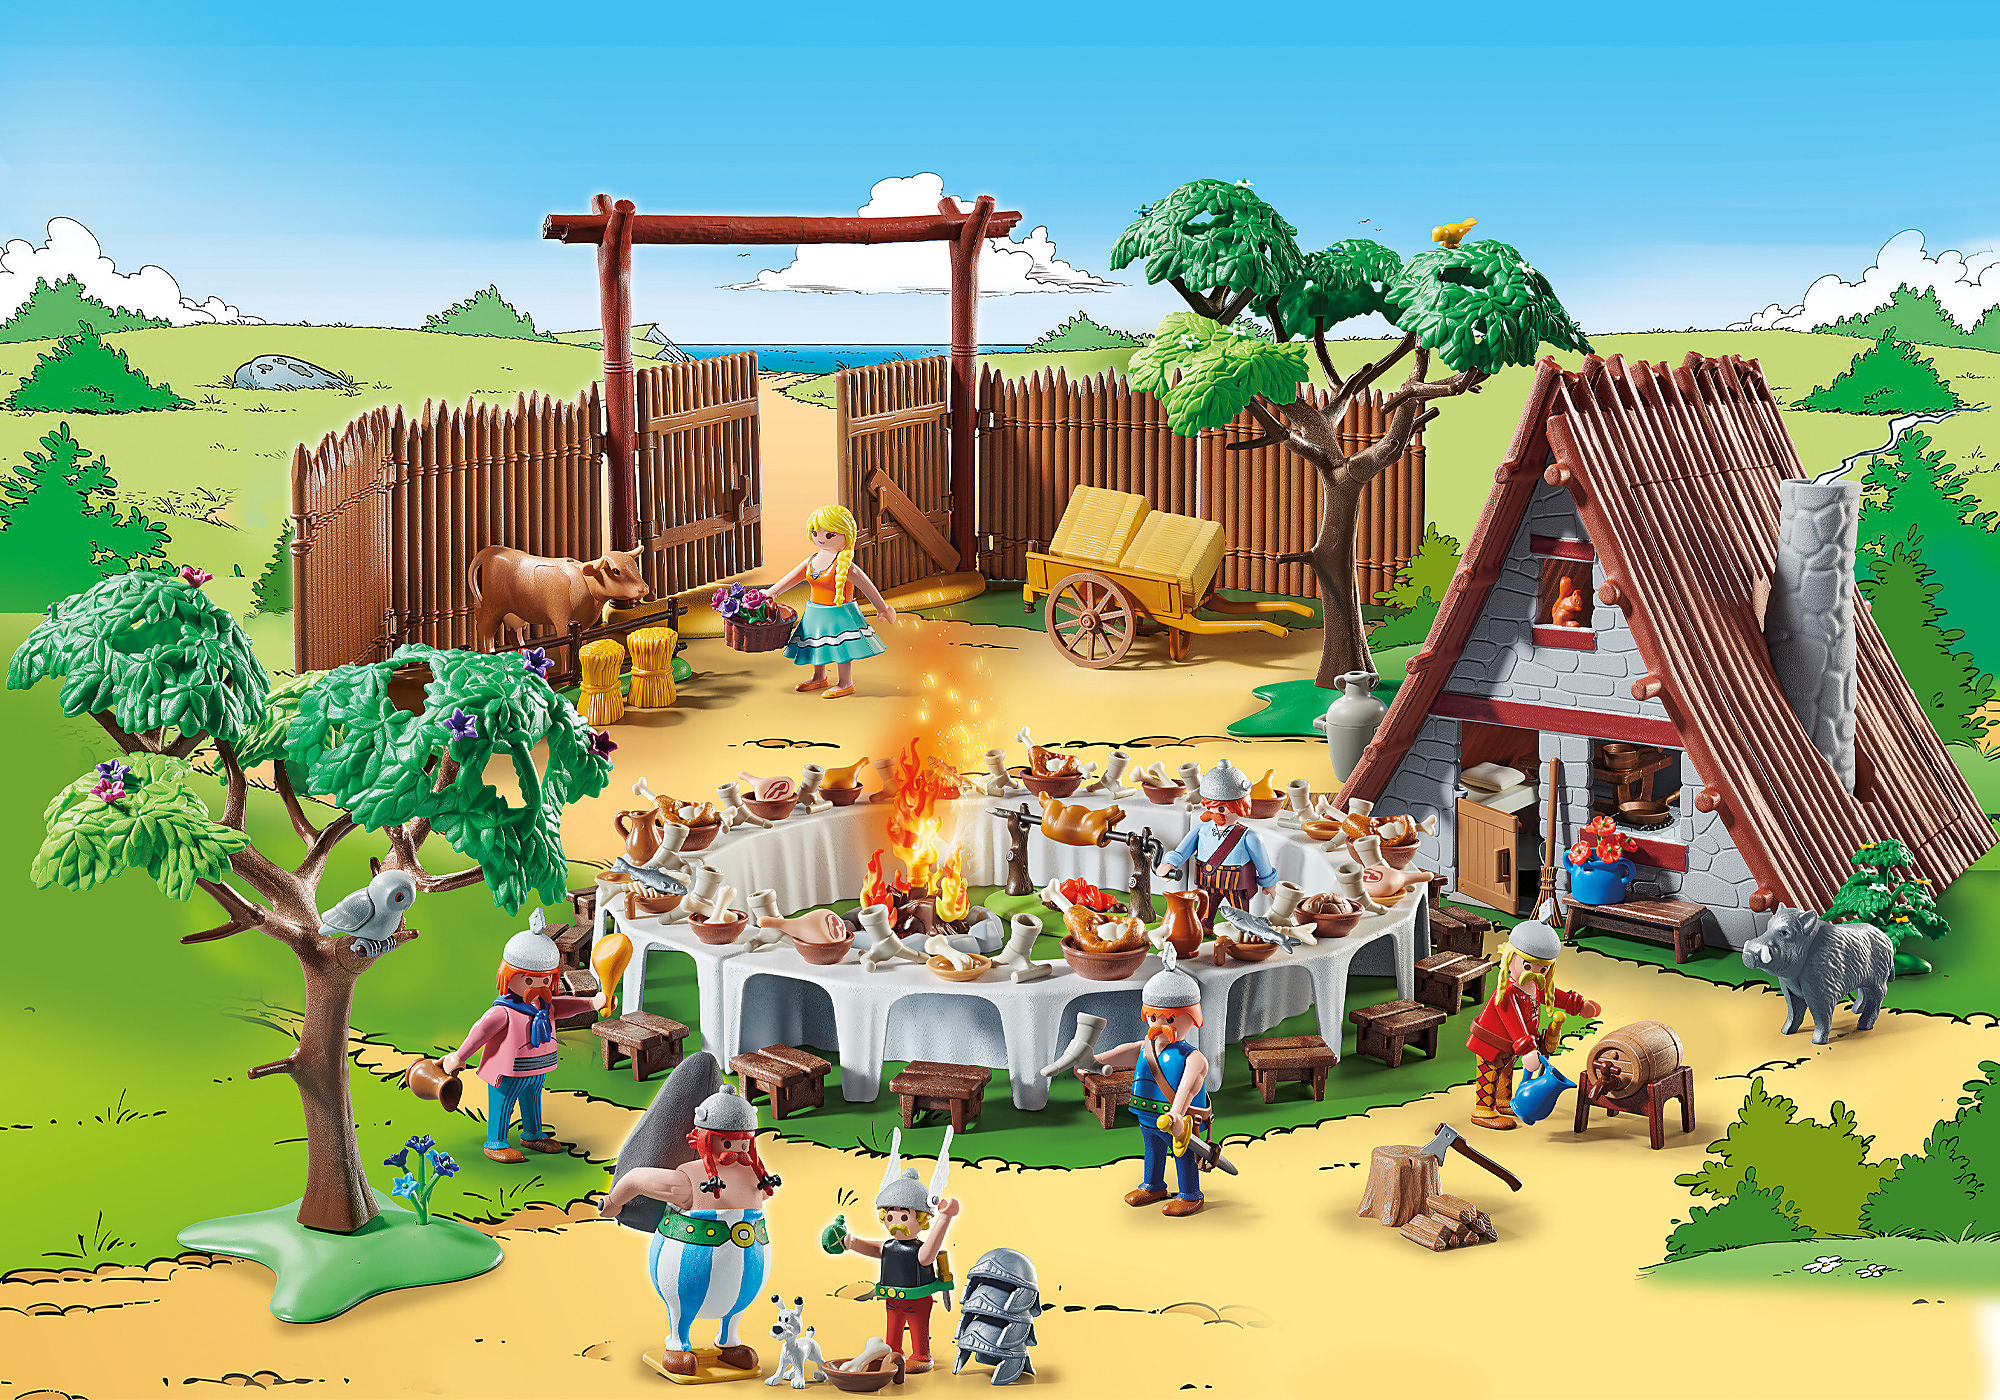 Playmobil - Welcome to the world of Asterix and Obelix in